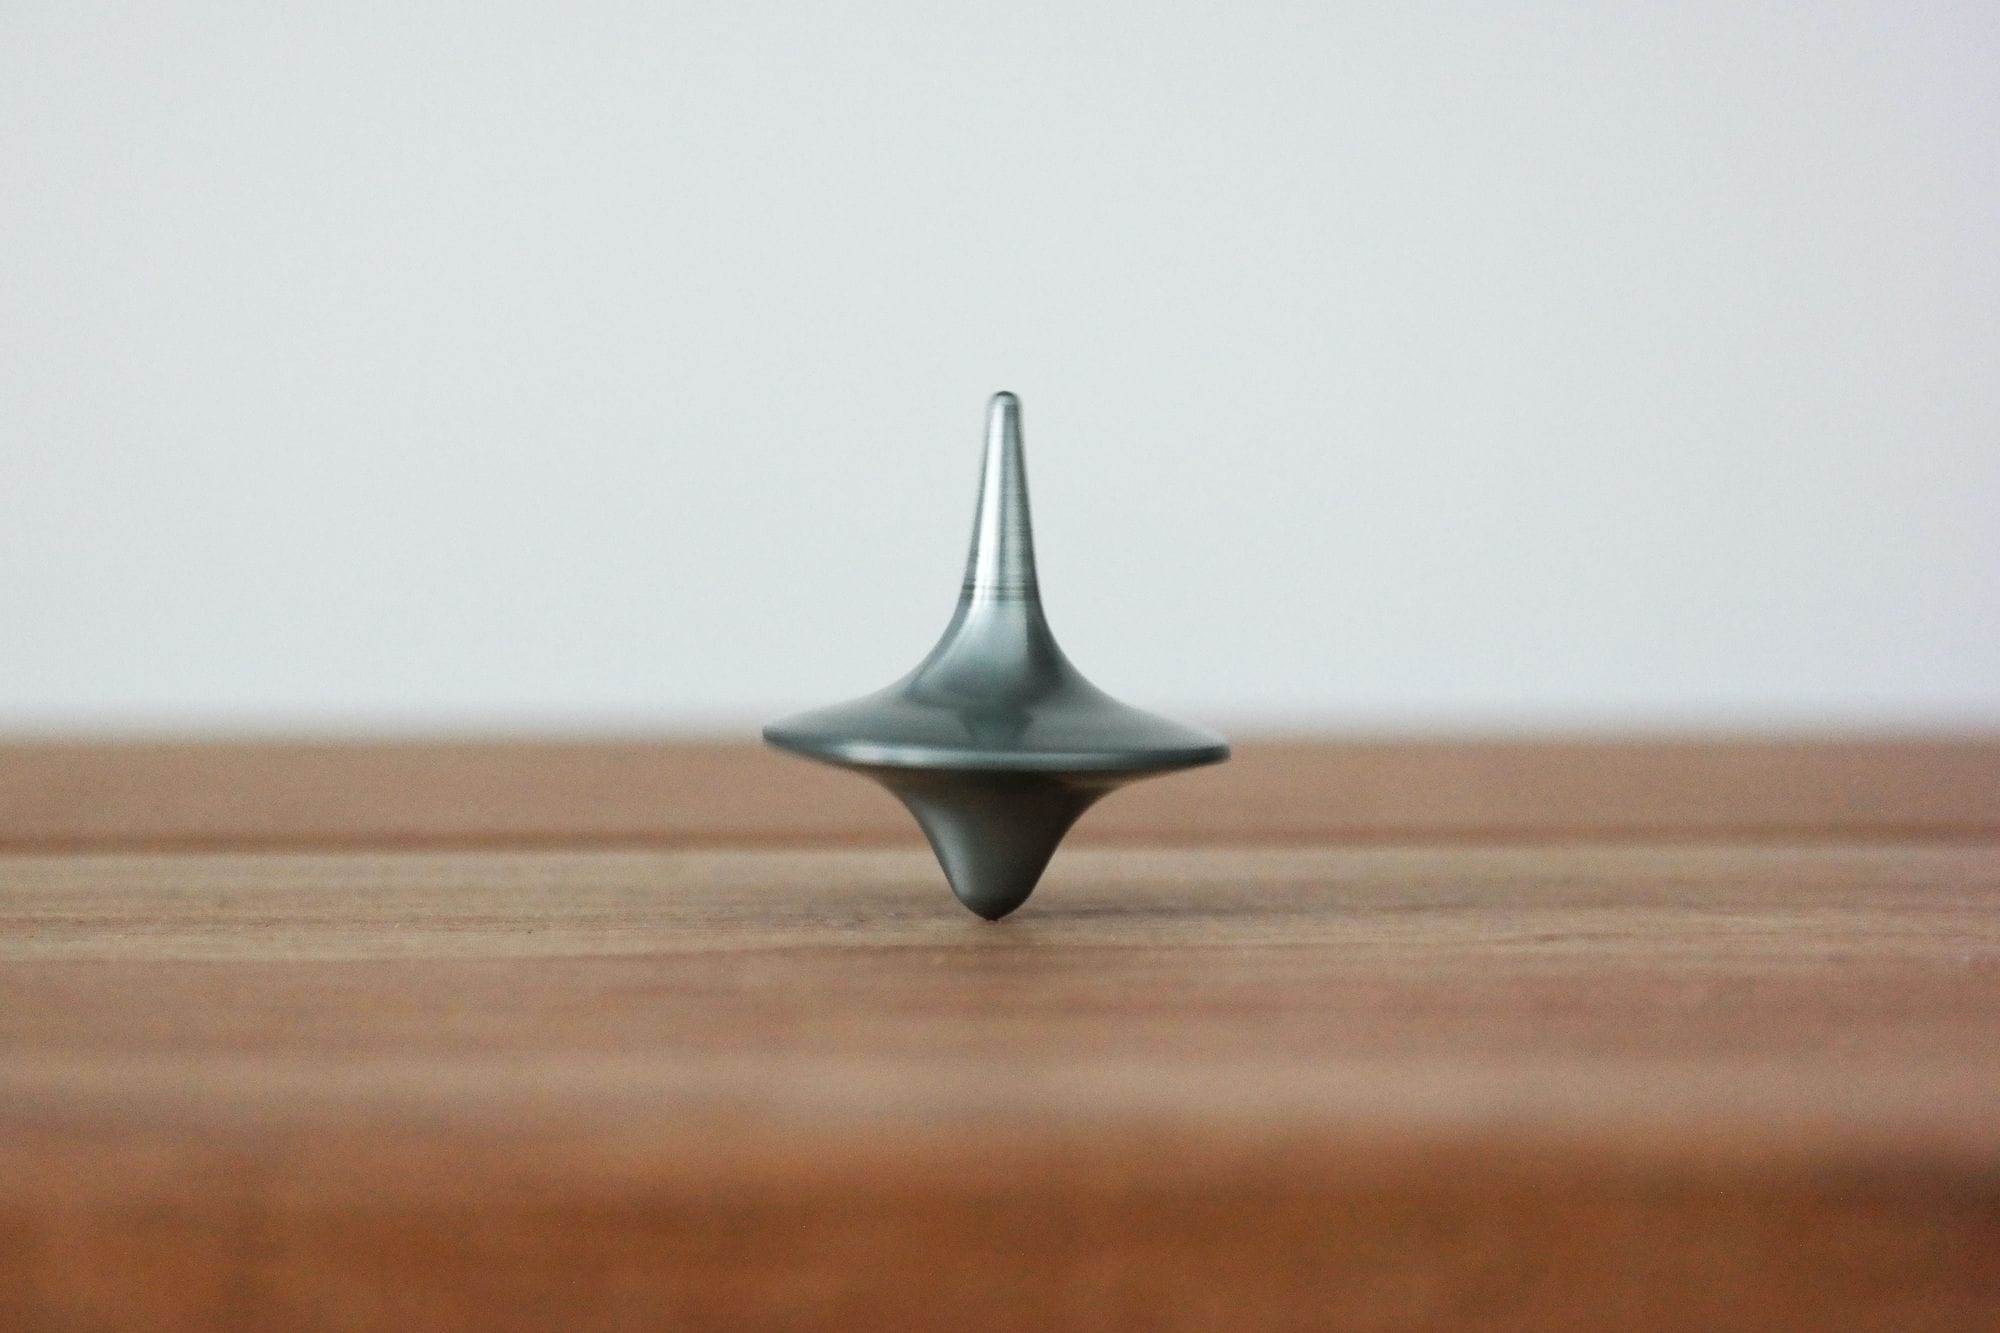  A spinning top on a wooden surface.